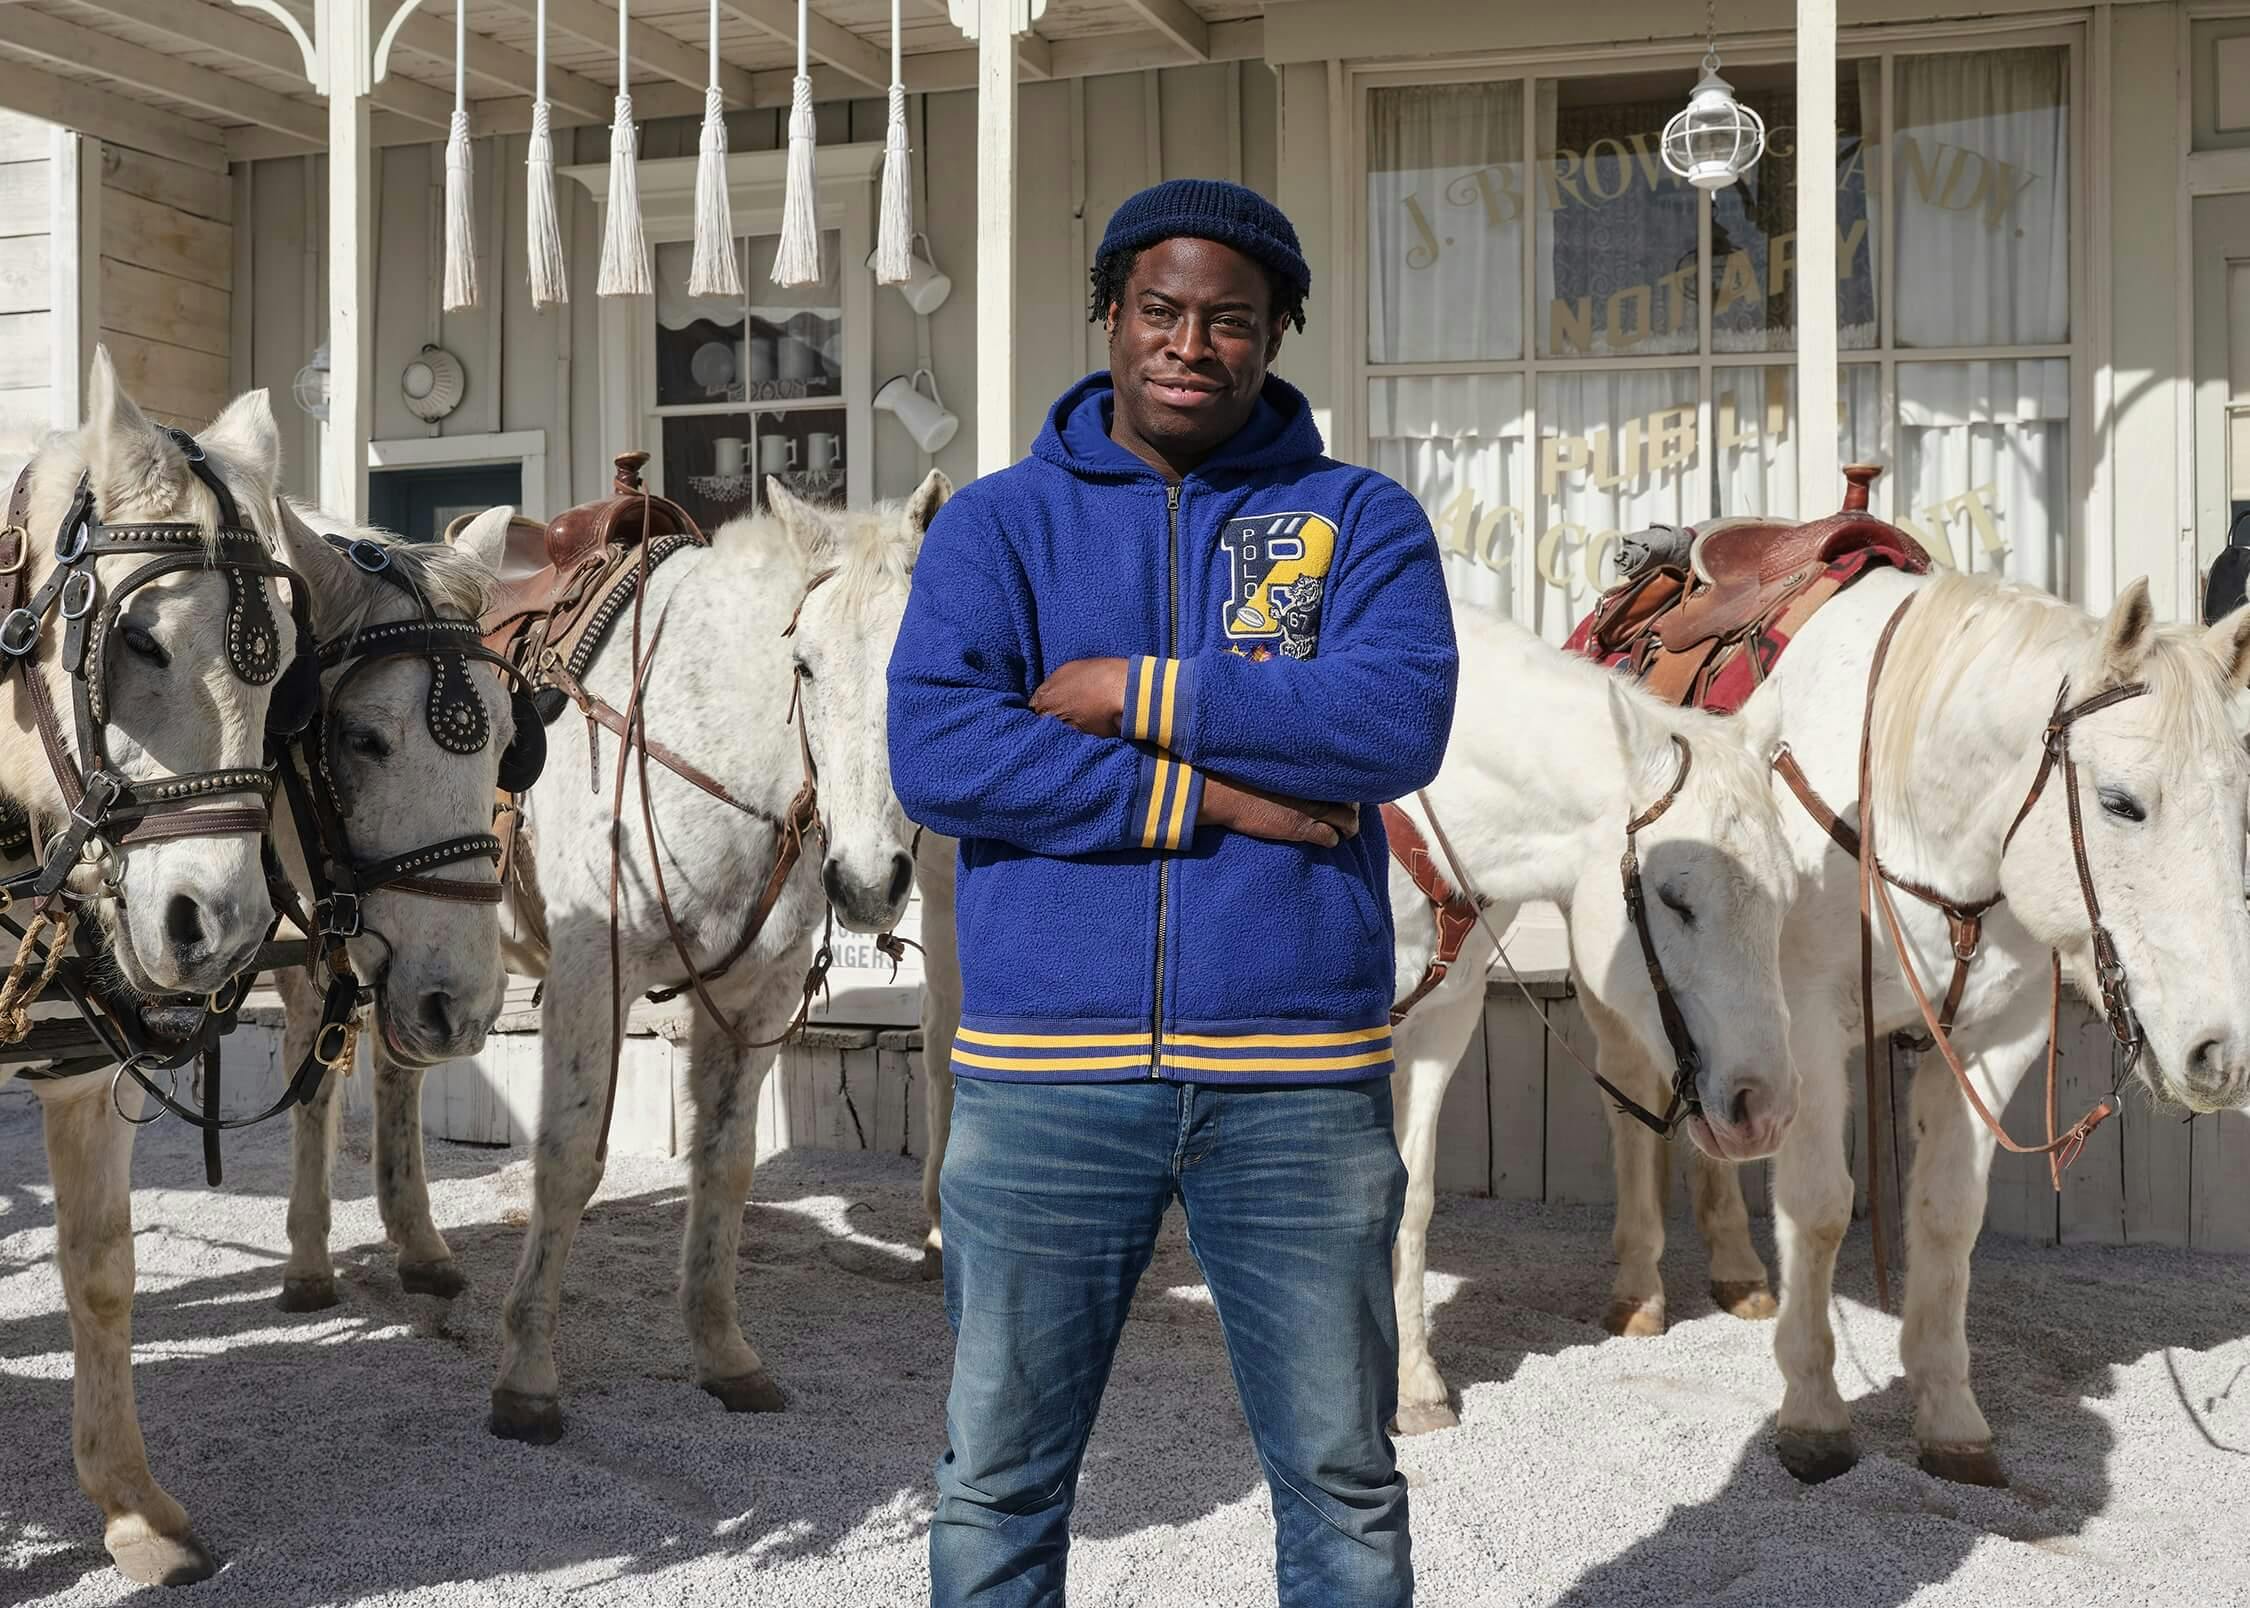 Jeymes Samuel wears a blue and yellow hoodie, navy hat, and blue jeans and stands with his arms crossed. Behind him are five white horses, and a white house.